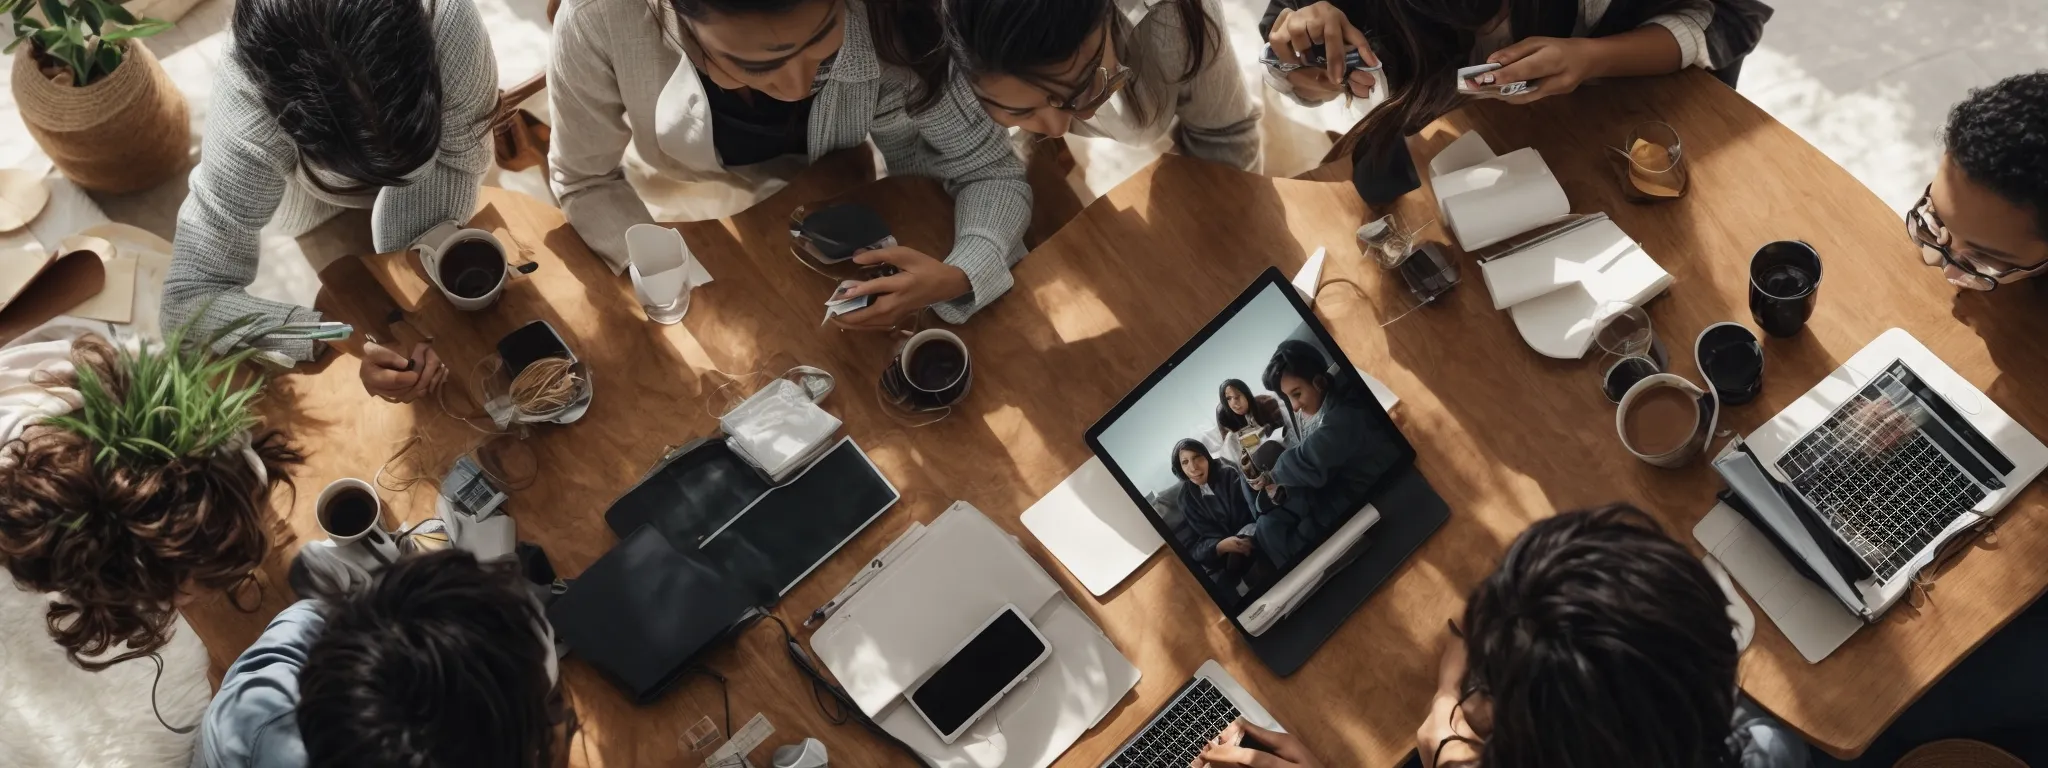 a diverse group of people gathered around a table with various digital devices, illustrating a brainstorming session for a digital marketing campaign.